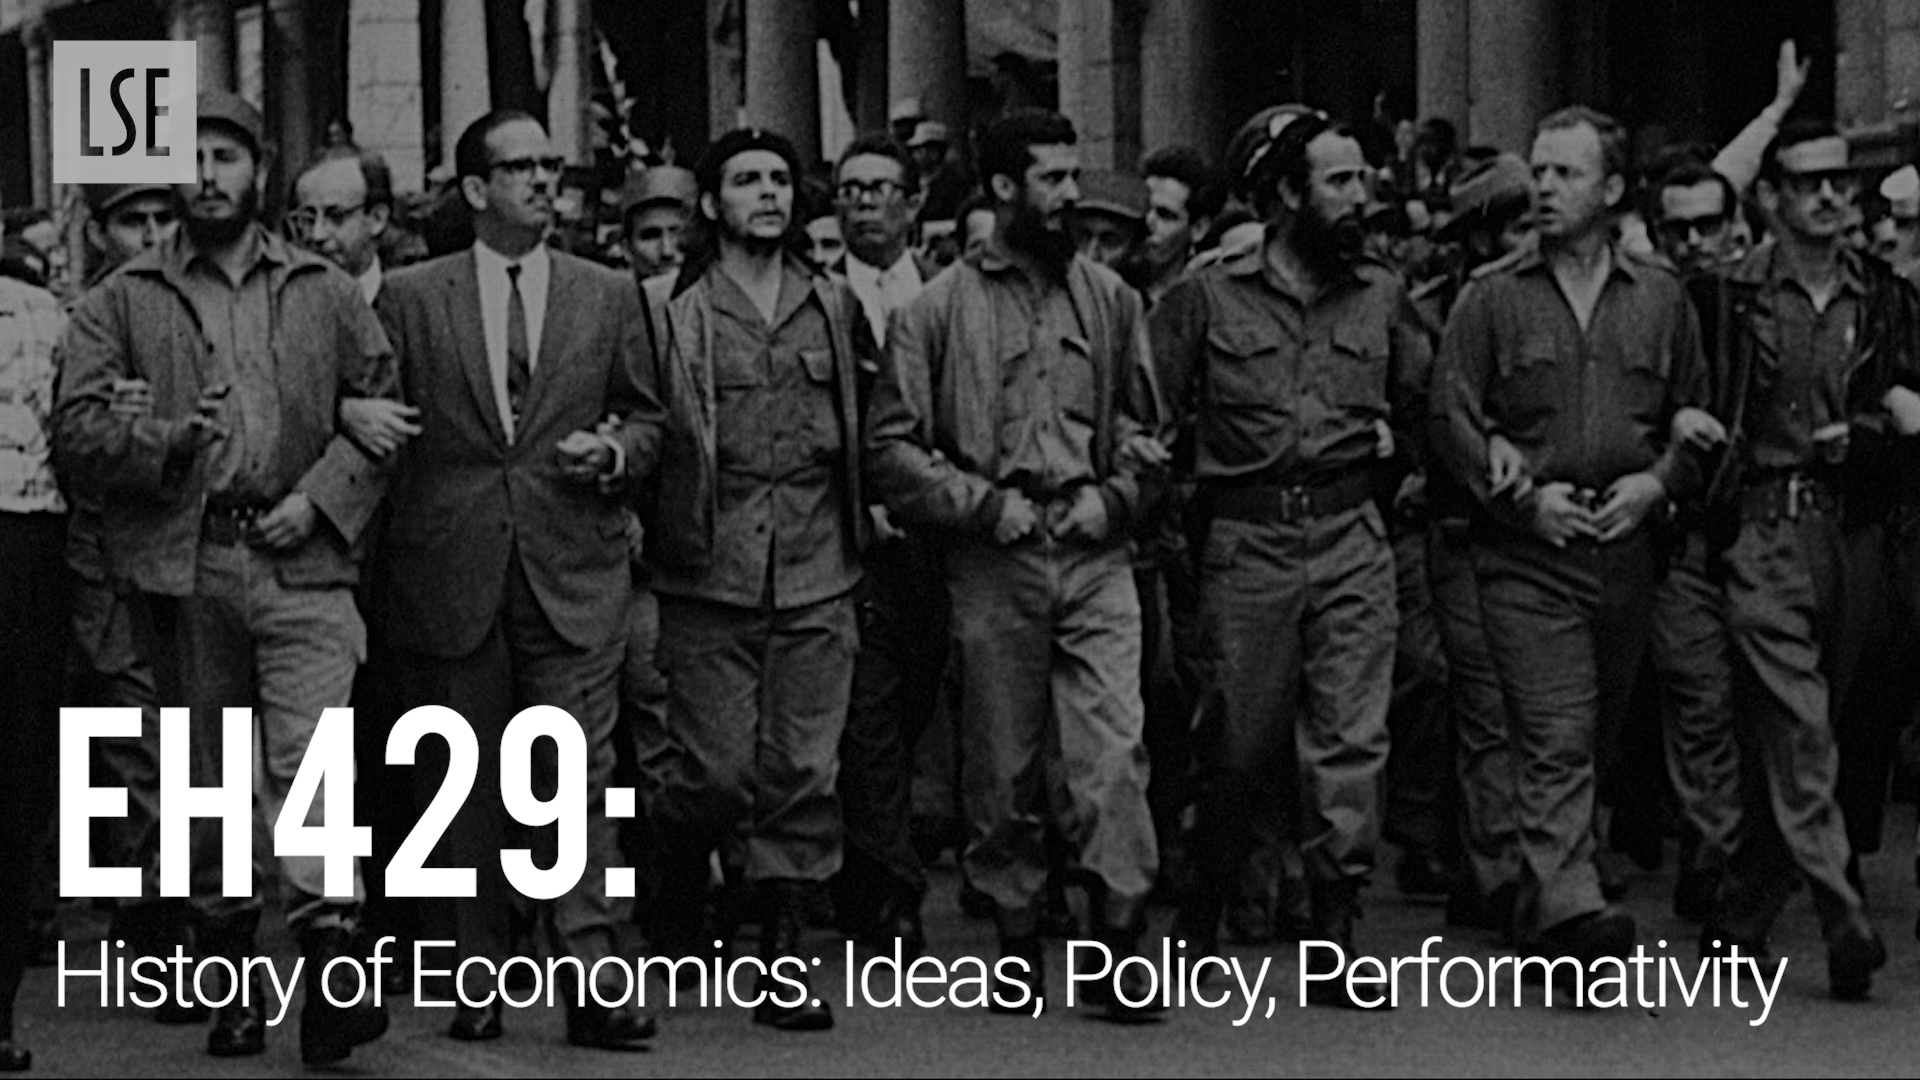 EH429 History of Economics: Ideas, Policy and Performativity